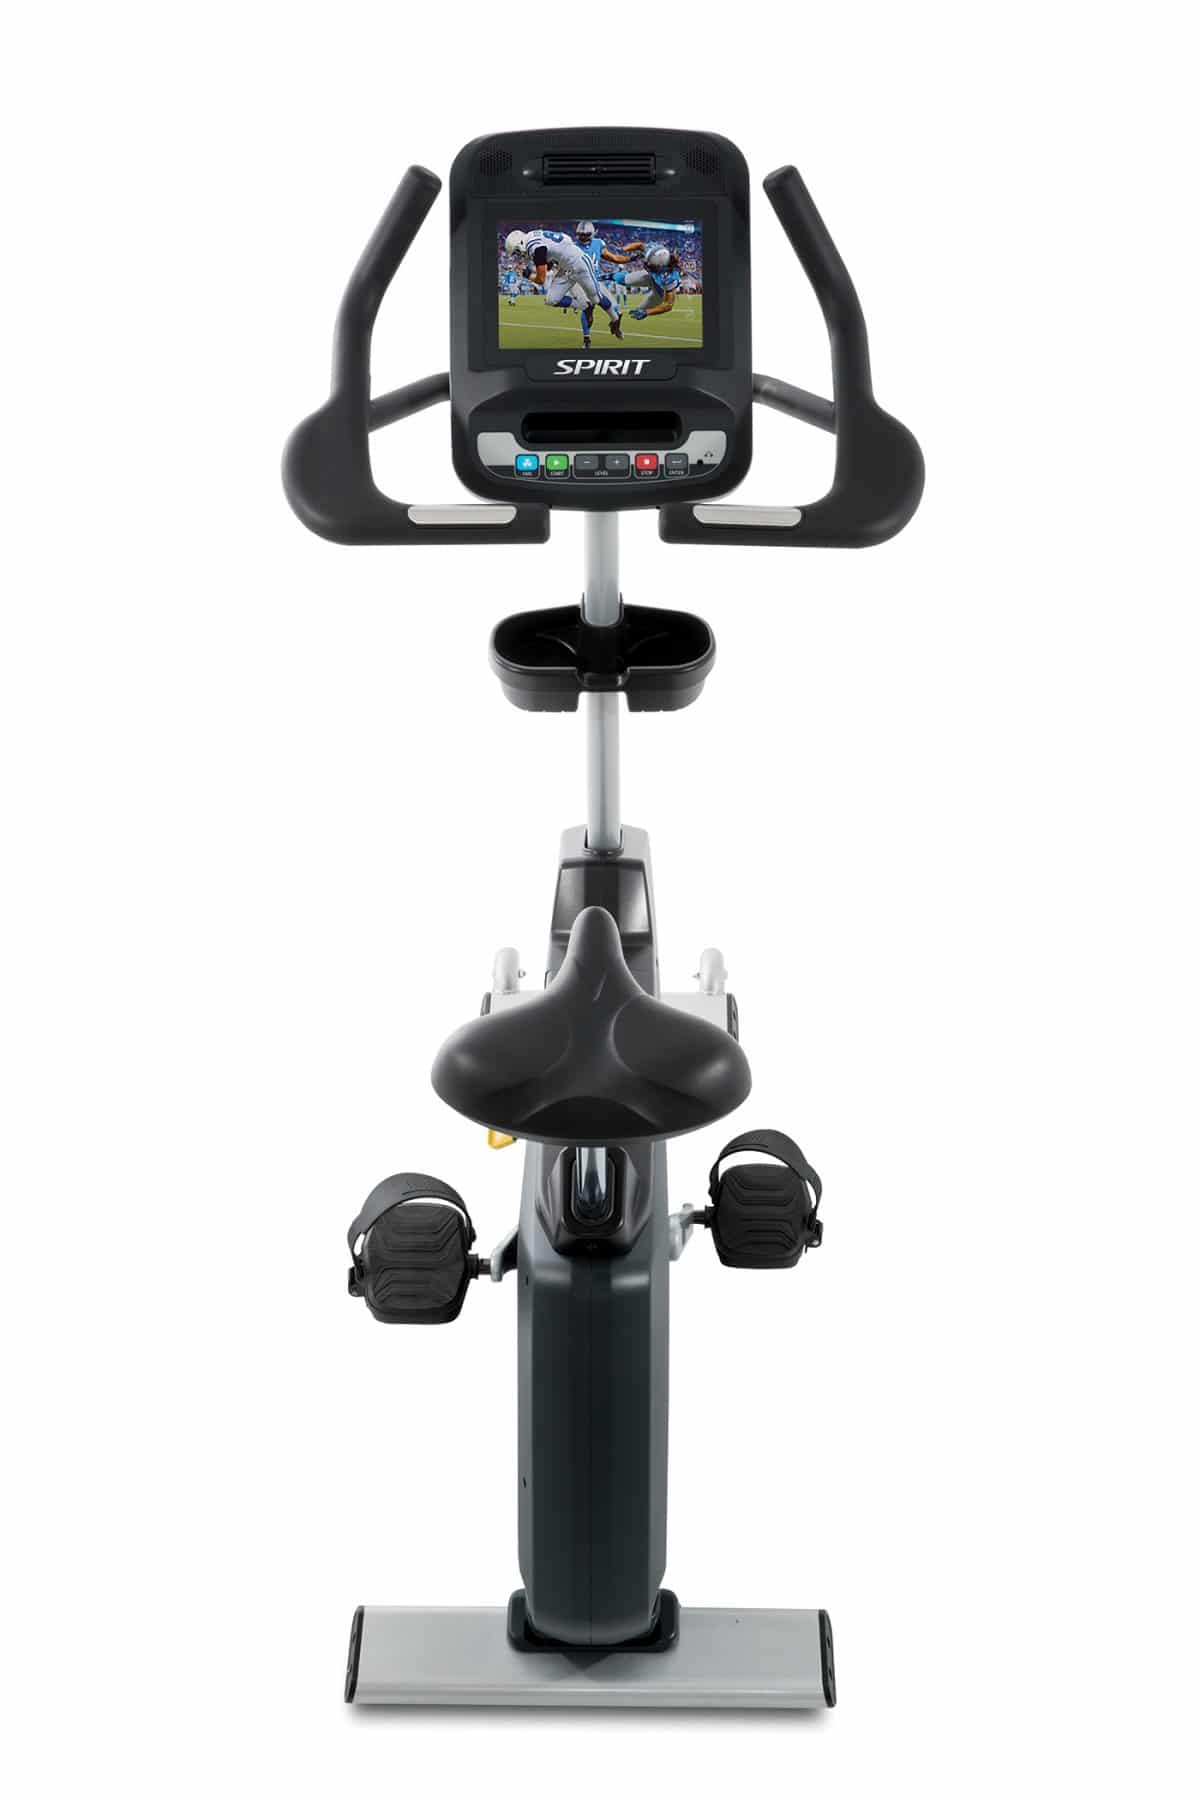 A stationary exercise bike with a monitor on it.